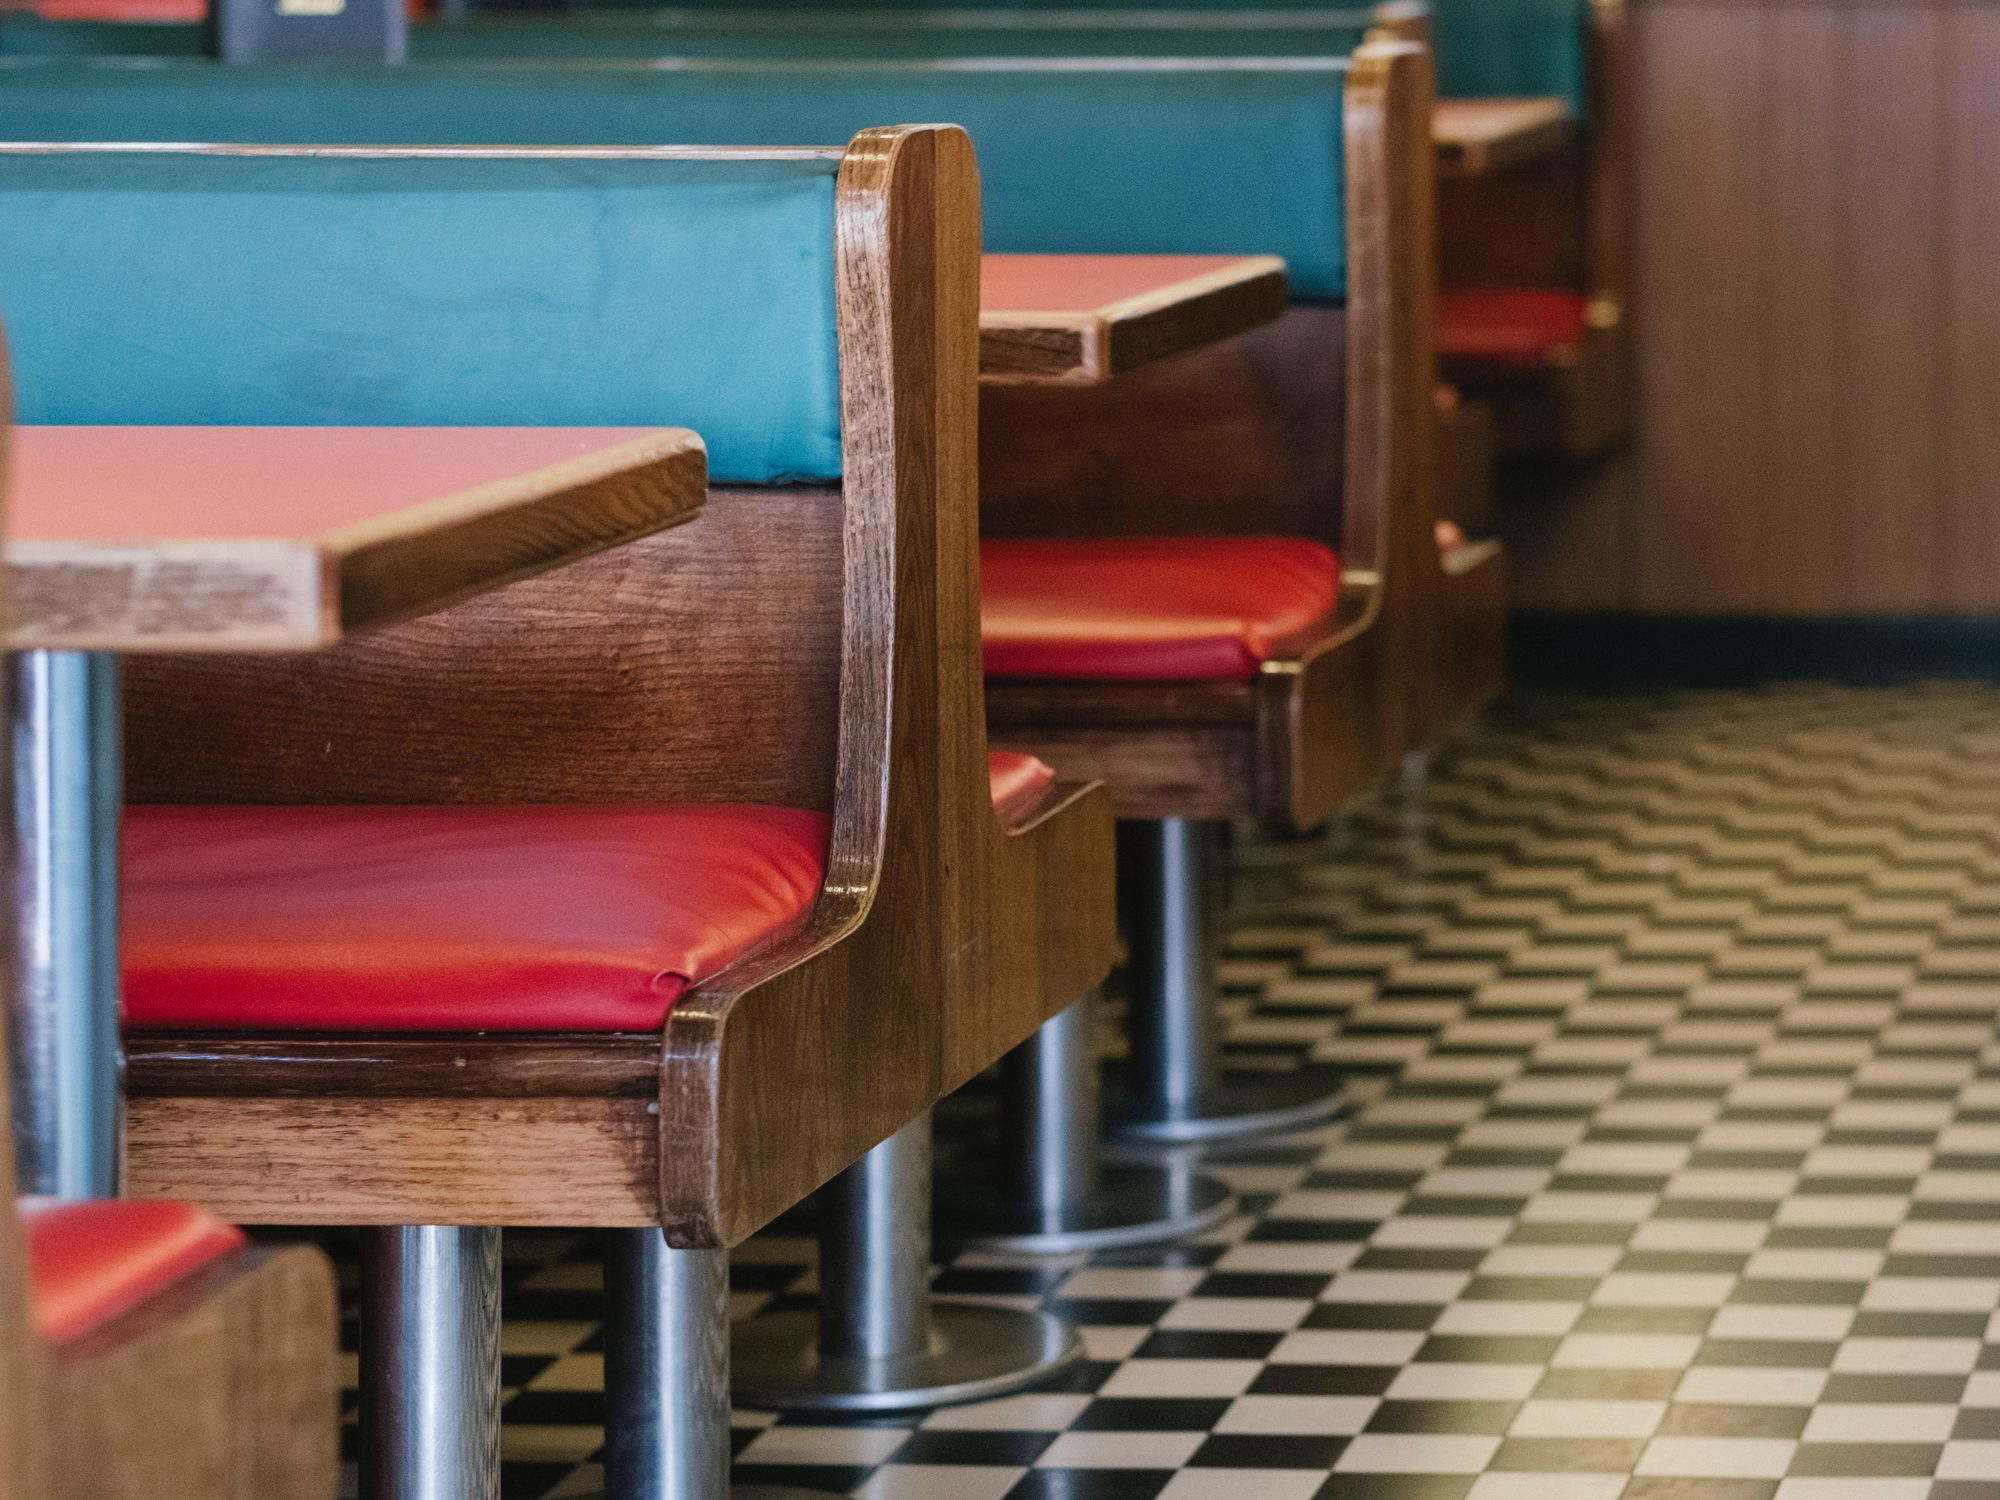 Diner benches